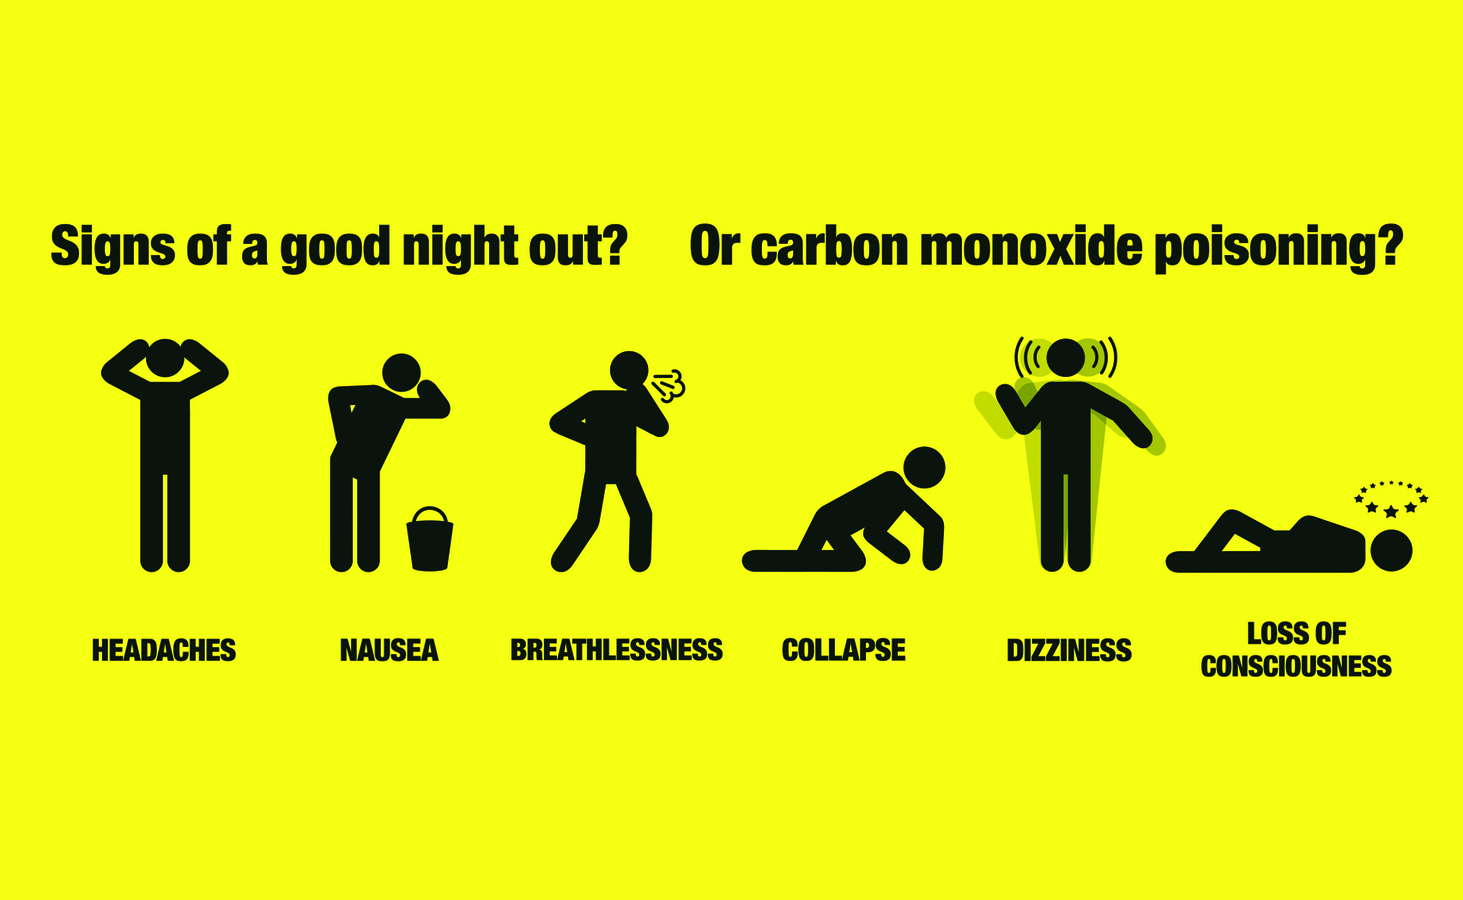 signs of carbon monoxide poisoning